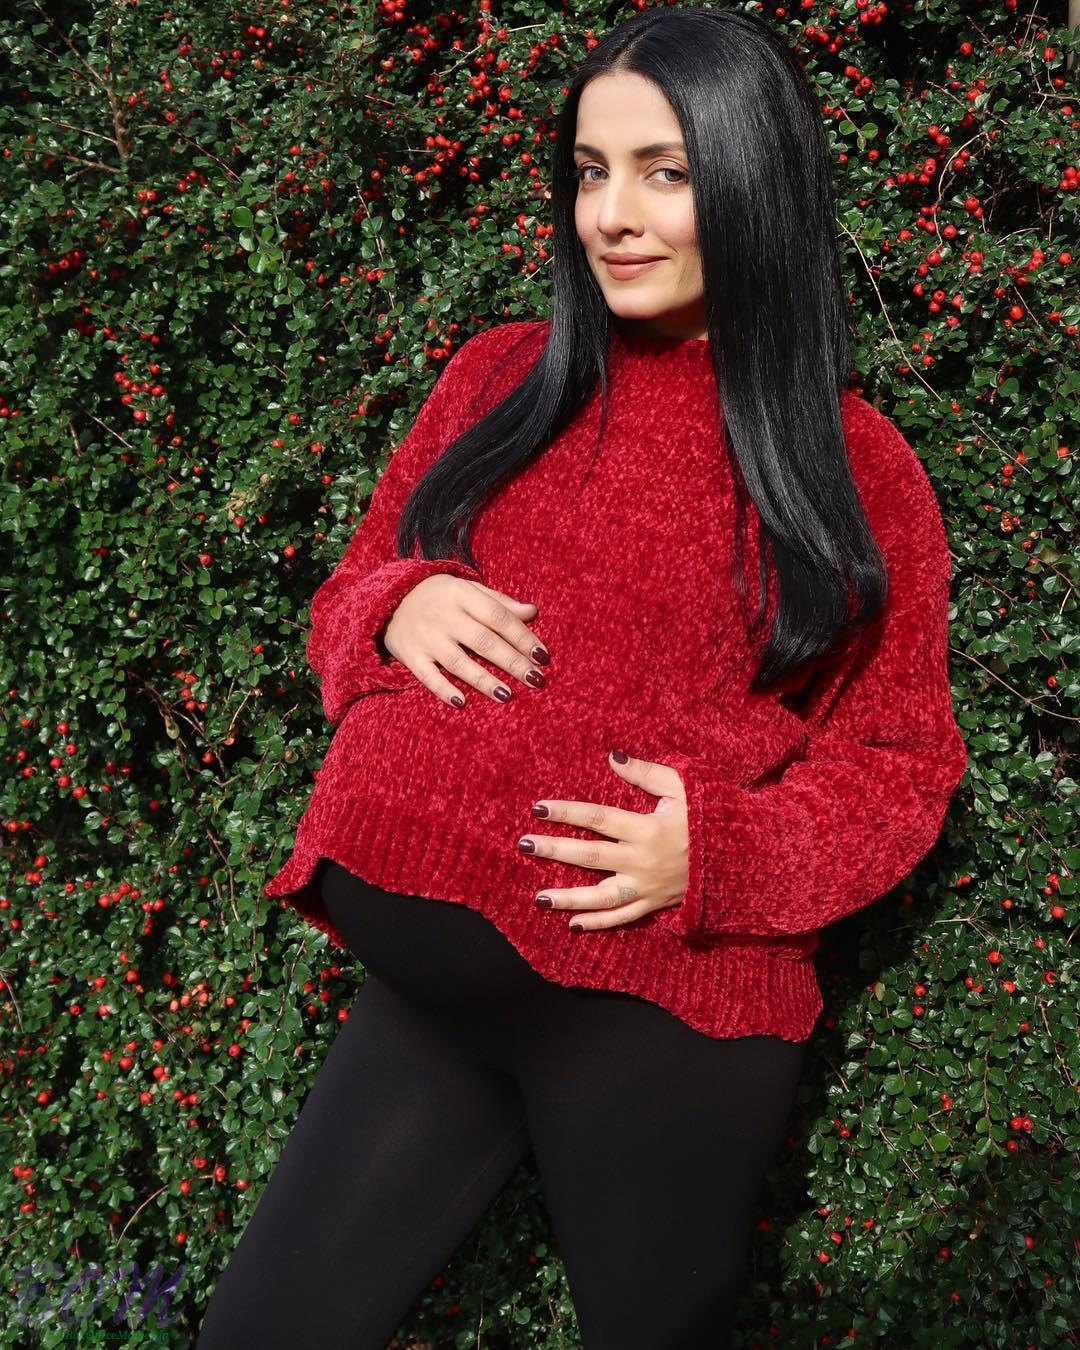 Celina Jaitly gorgeous pic on her second baby bump